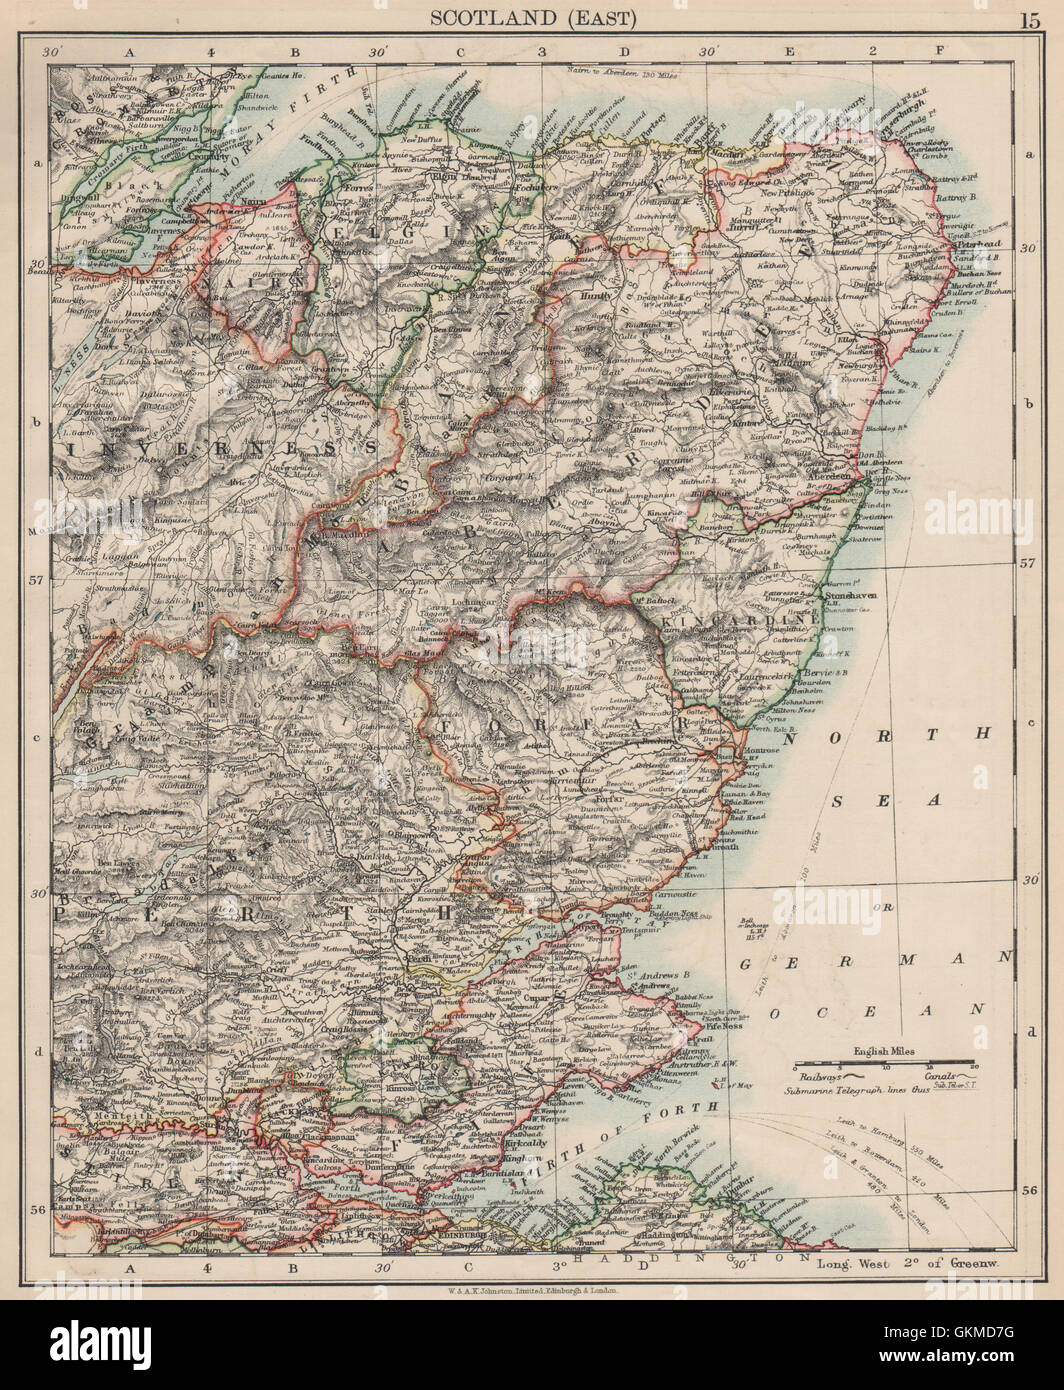 SCOTLAND EAST. Grampian Tayside Fife Firth of Forth Aberdeen.JOHNSTON, 1903 map Stock Photo